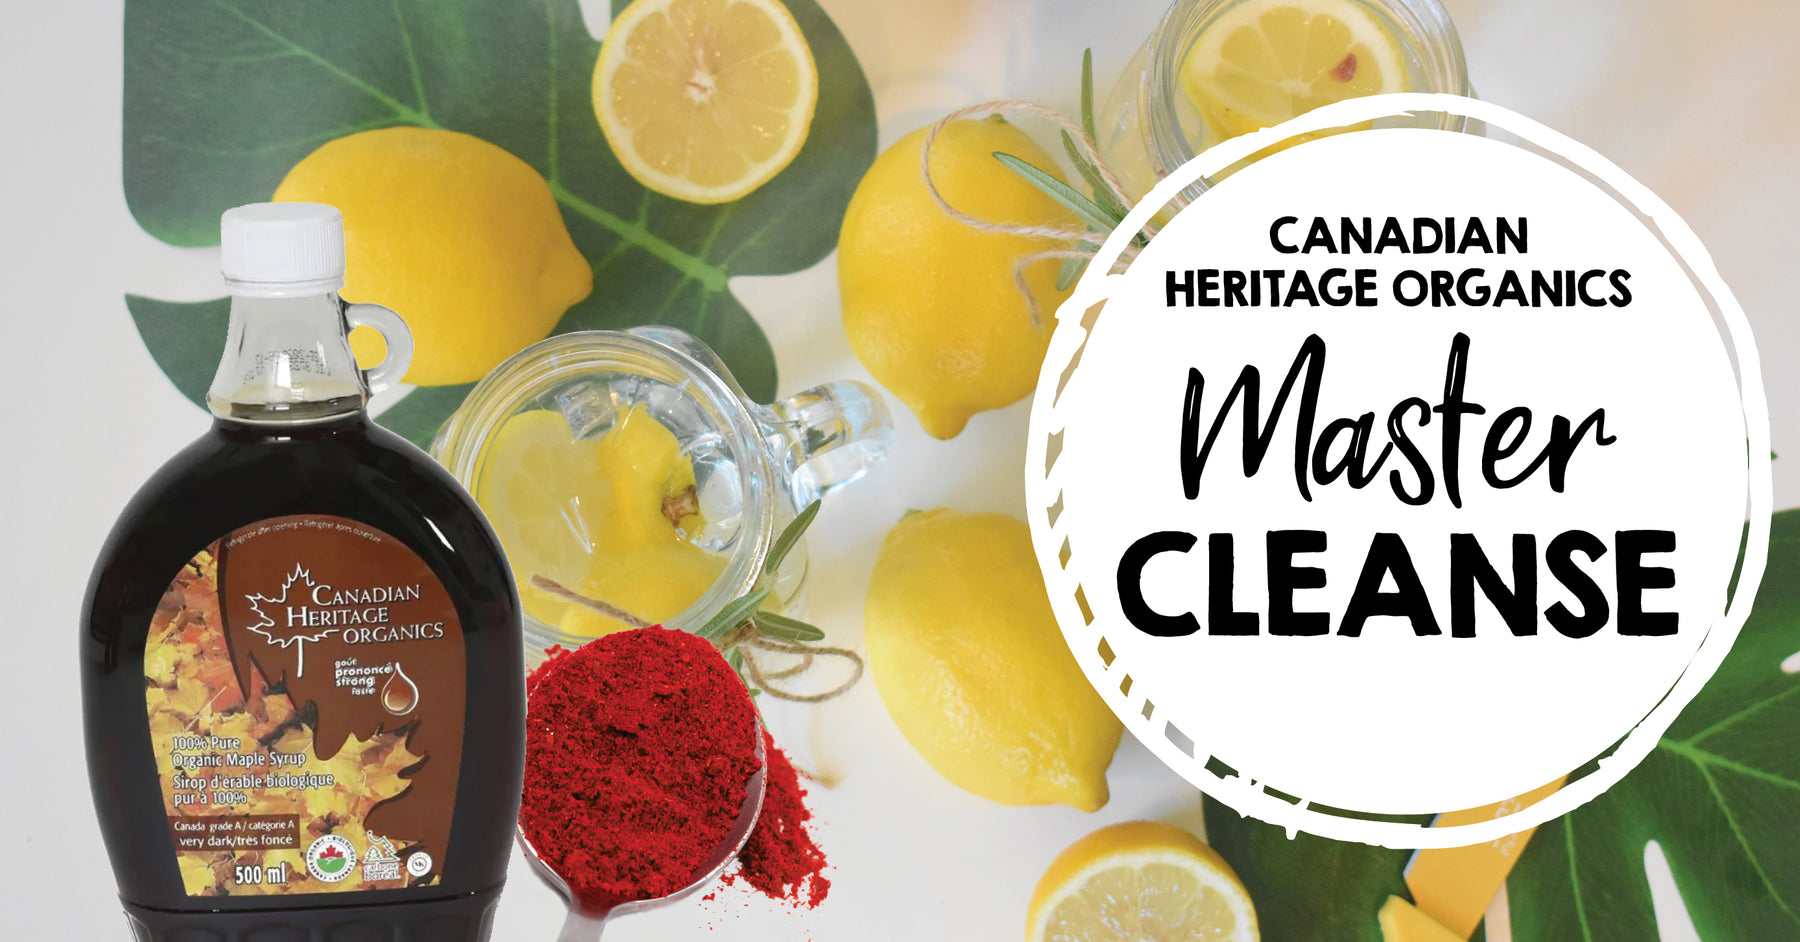 Master Cleanse with Canadian Heritage Maple Syrup